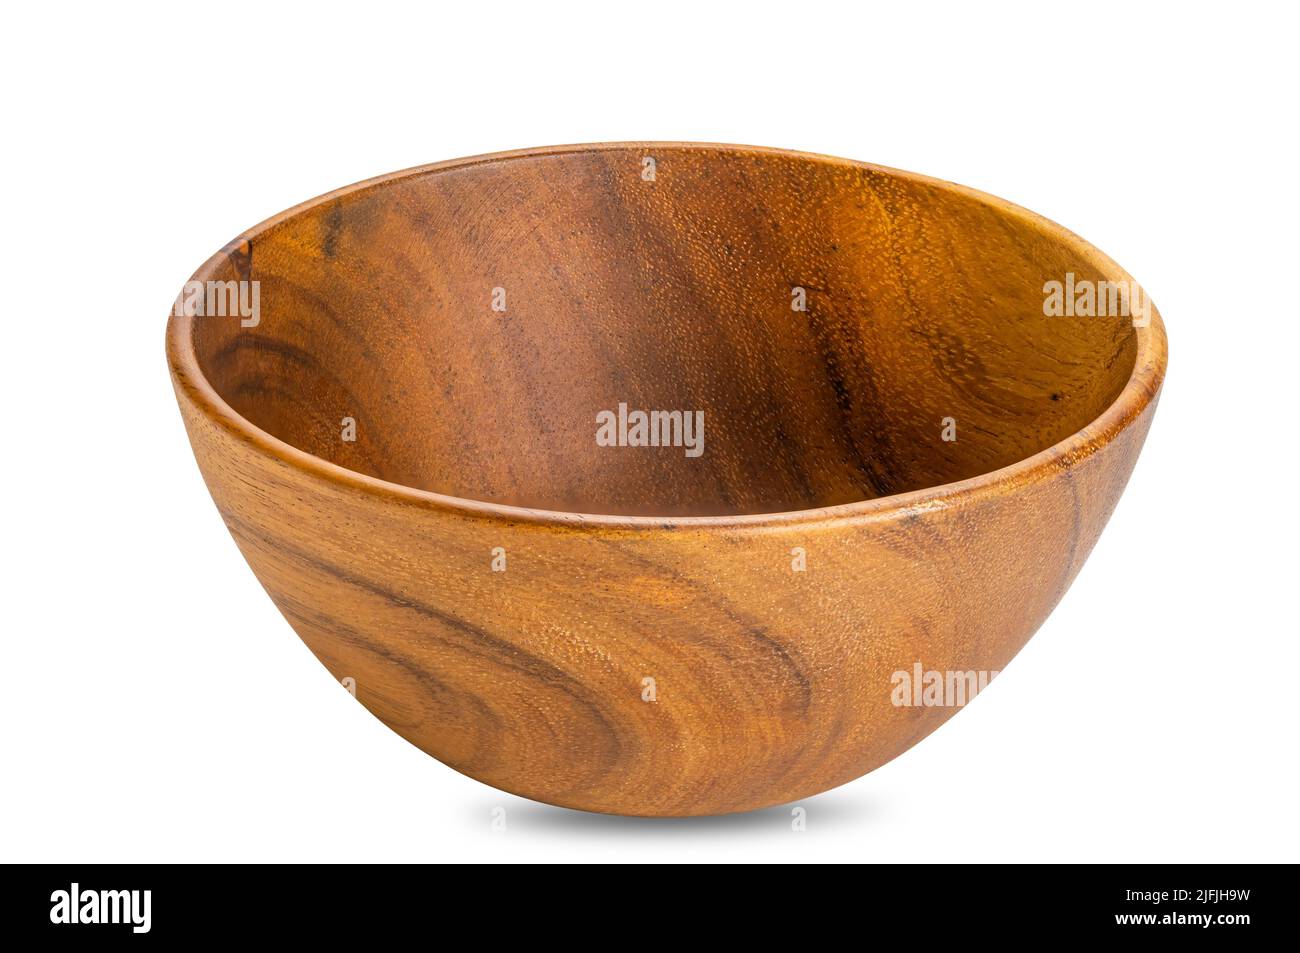 Closeup view of deep empty wooden bowl isolated on white baclground with clipping path. Stock Photo